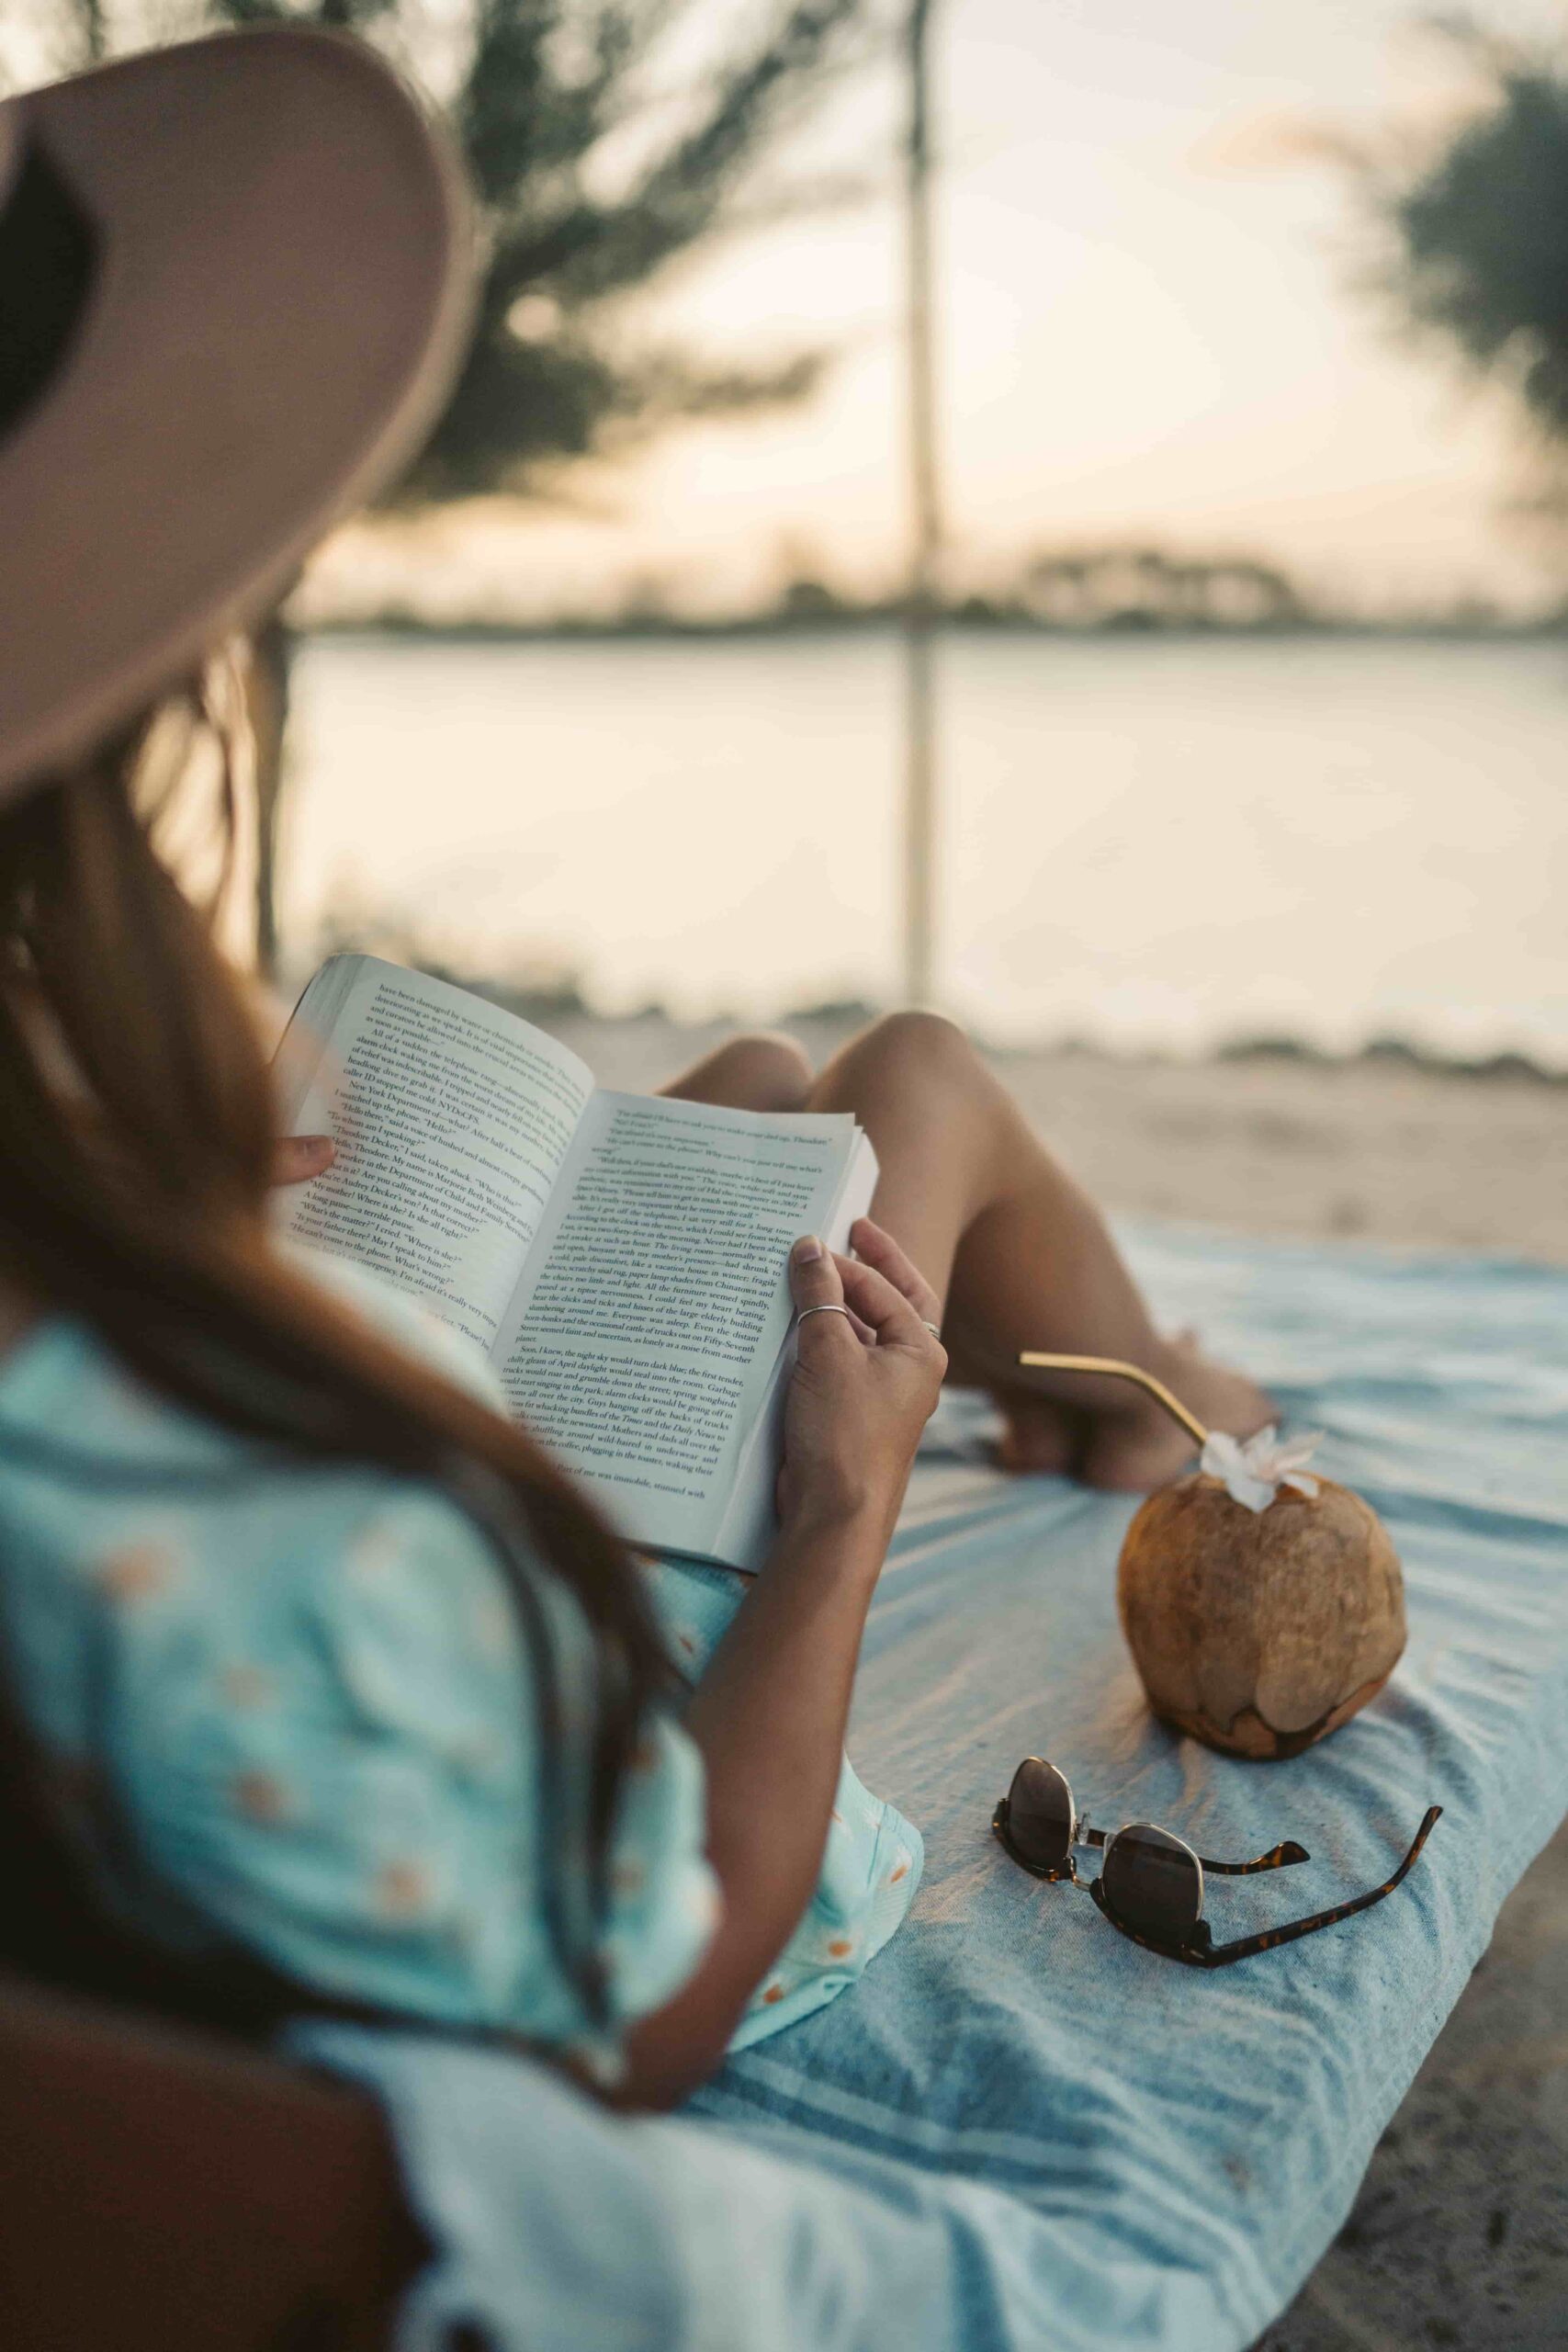 A woman is sat on a beach at sunset wearing a wide brimmed sun hat with an open book searched on her lap.